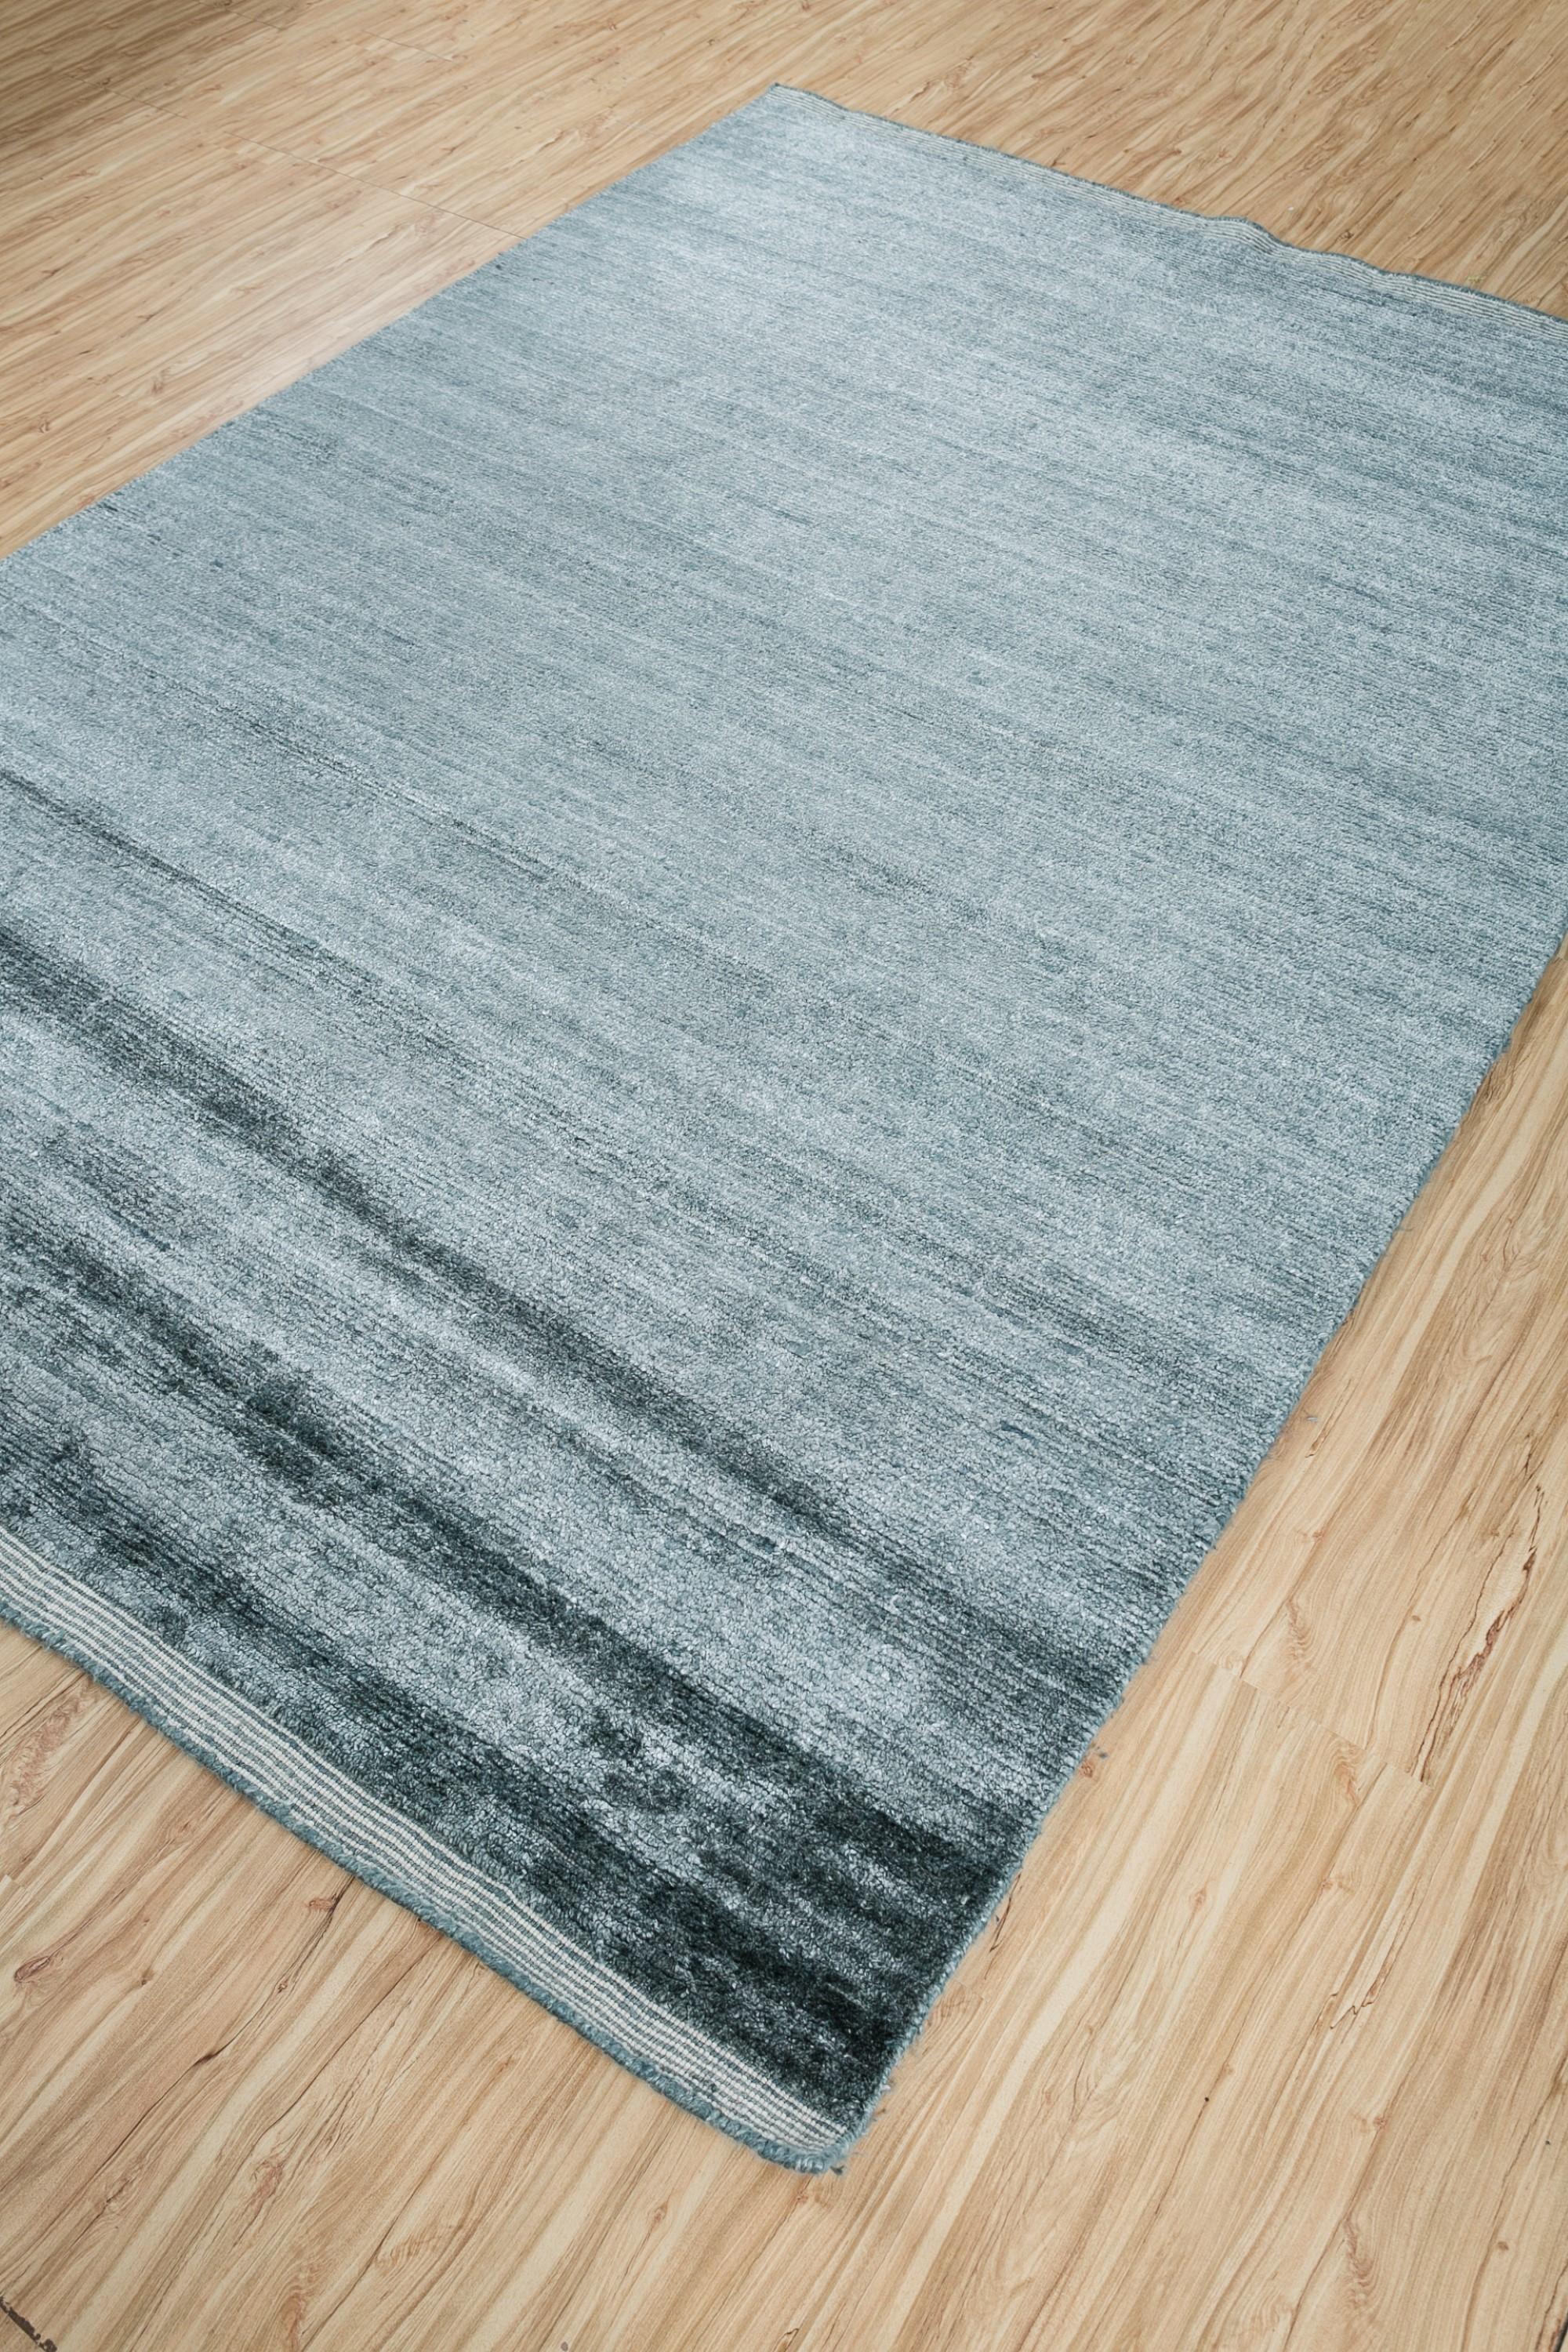 Ever wonder what happens when modern minimalism meets timeless artistry? Look no further than this rug, a handloom masterpiece by that captures the essence of both. Woven with the utmost care, this solid-color rug features an uneven, fading gradient